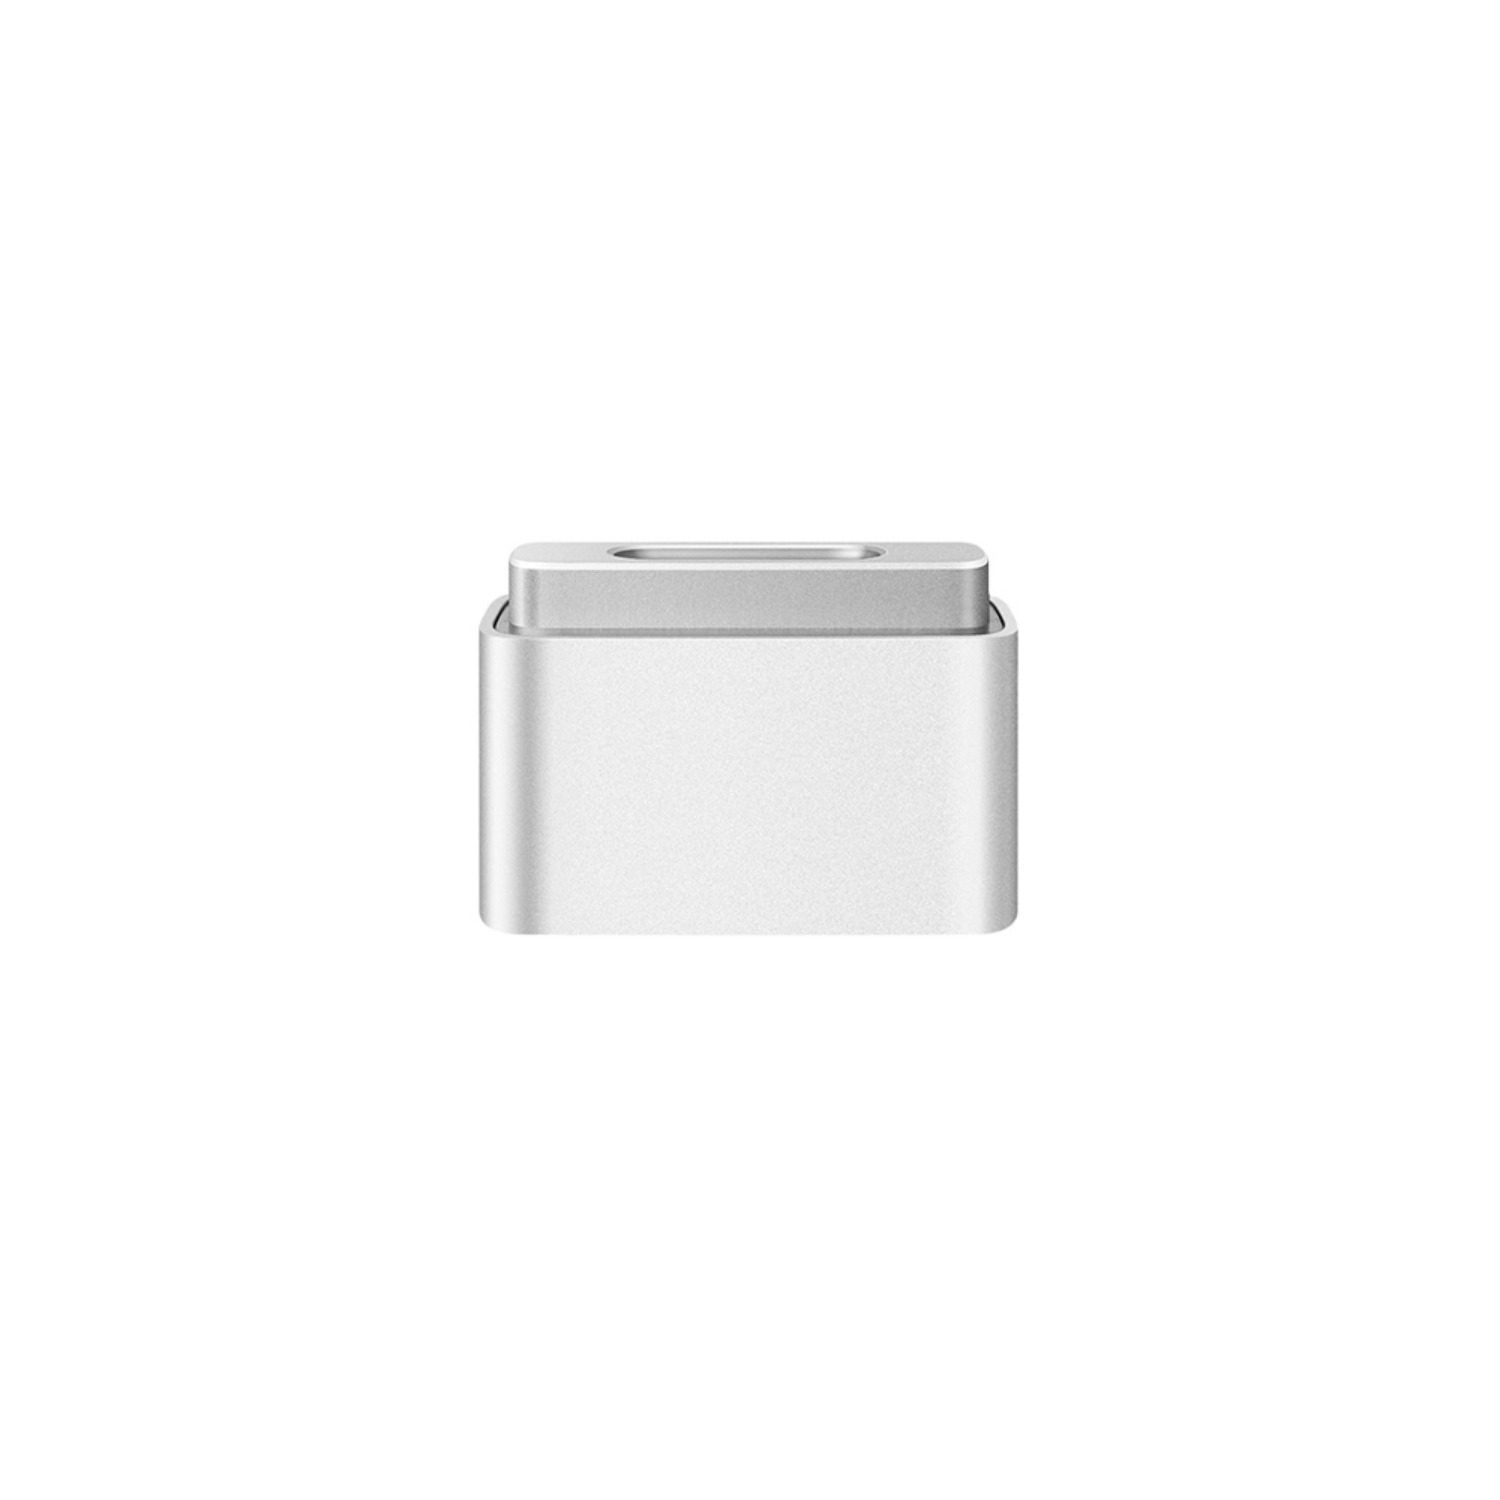 MagSafe-MagSafe 2 컨버터 * MD504FE/A